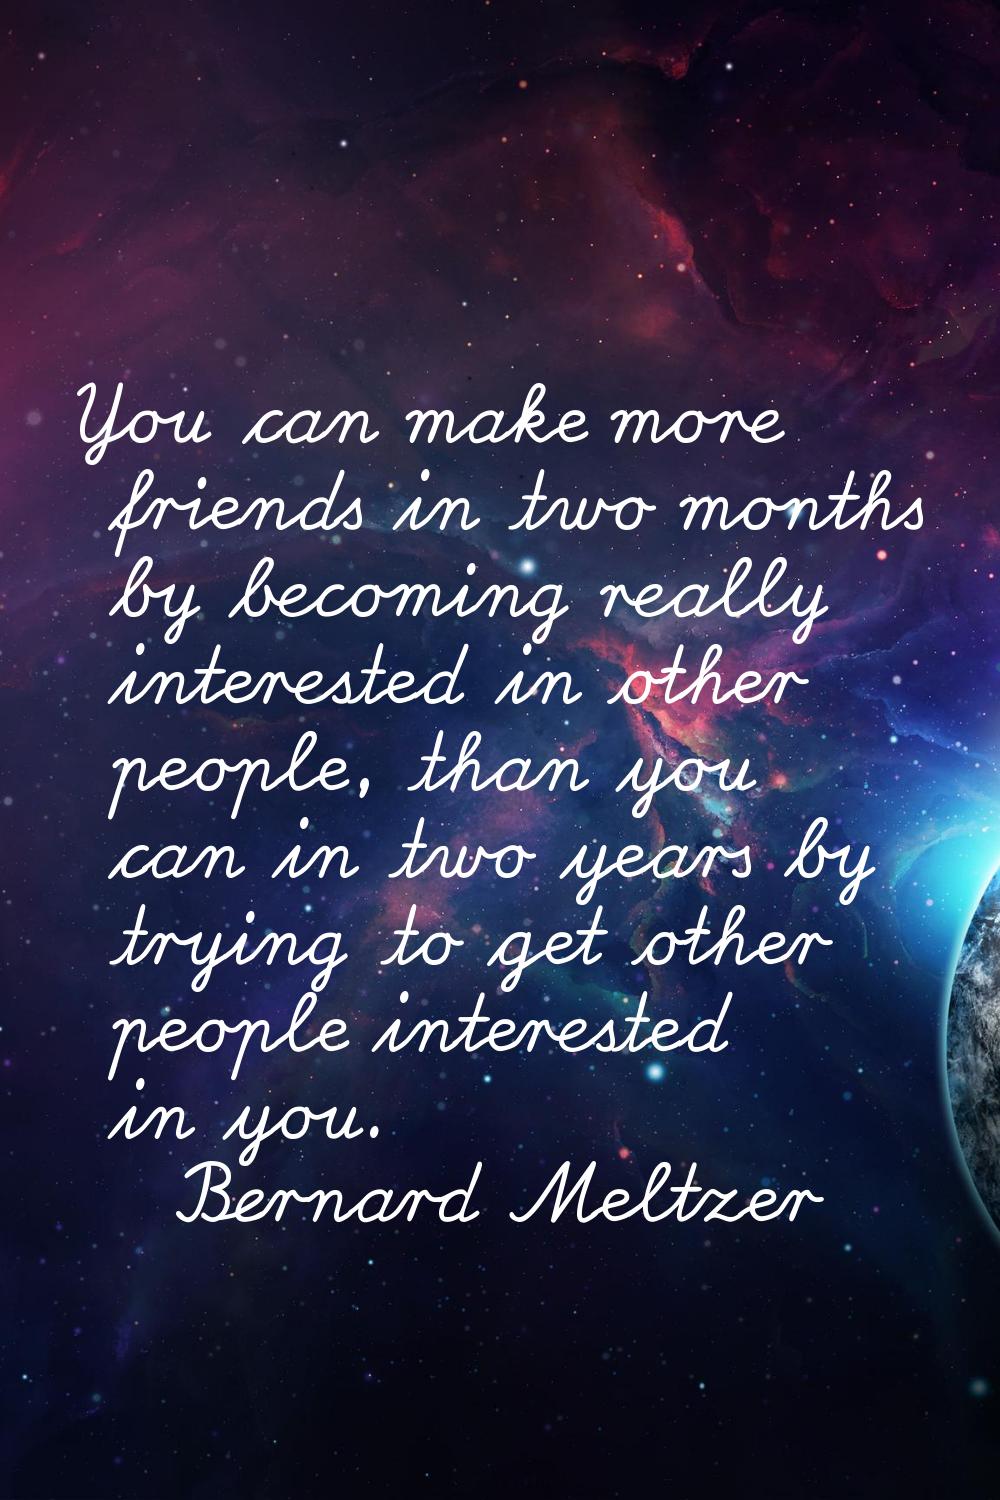 You can make more friends in two months by becoming really interested in other people, than you can